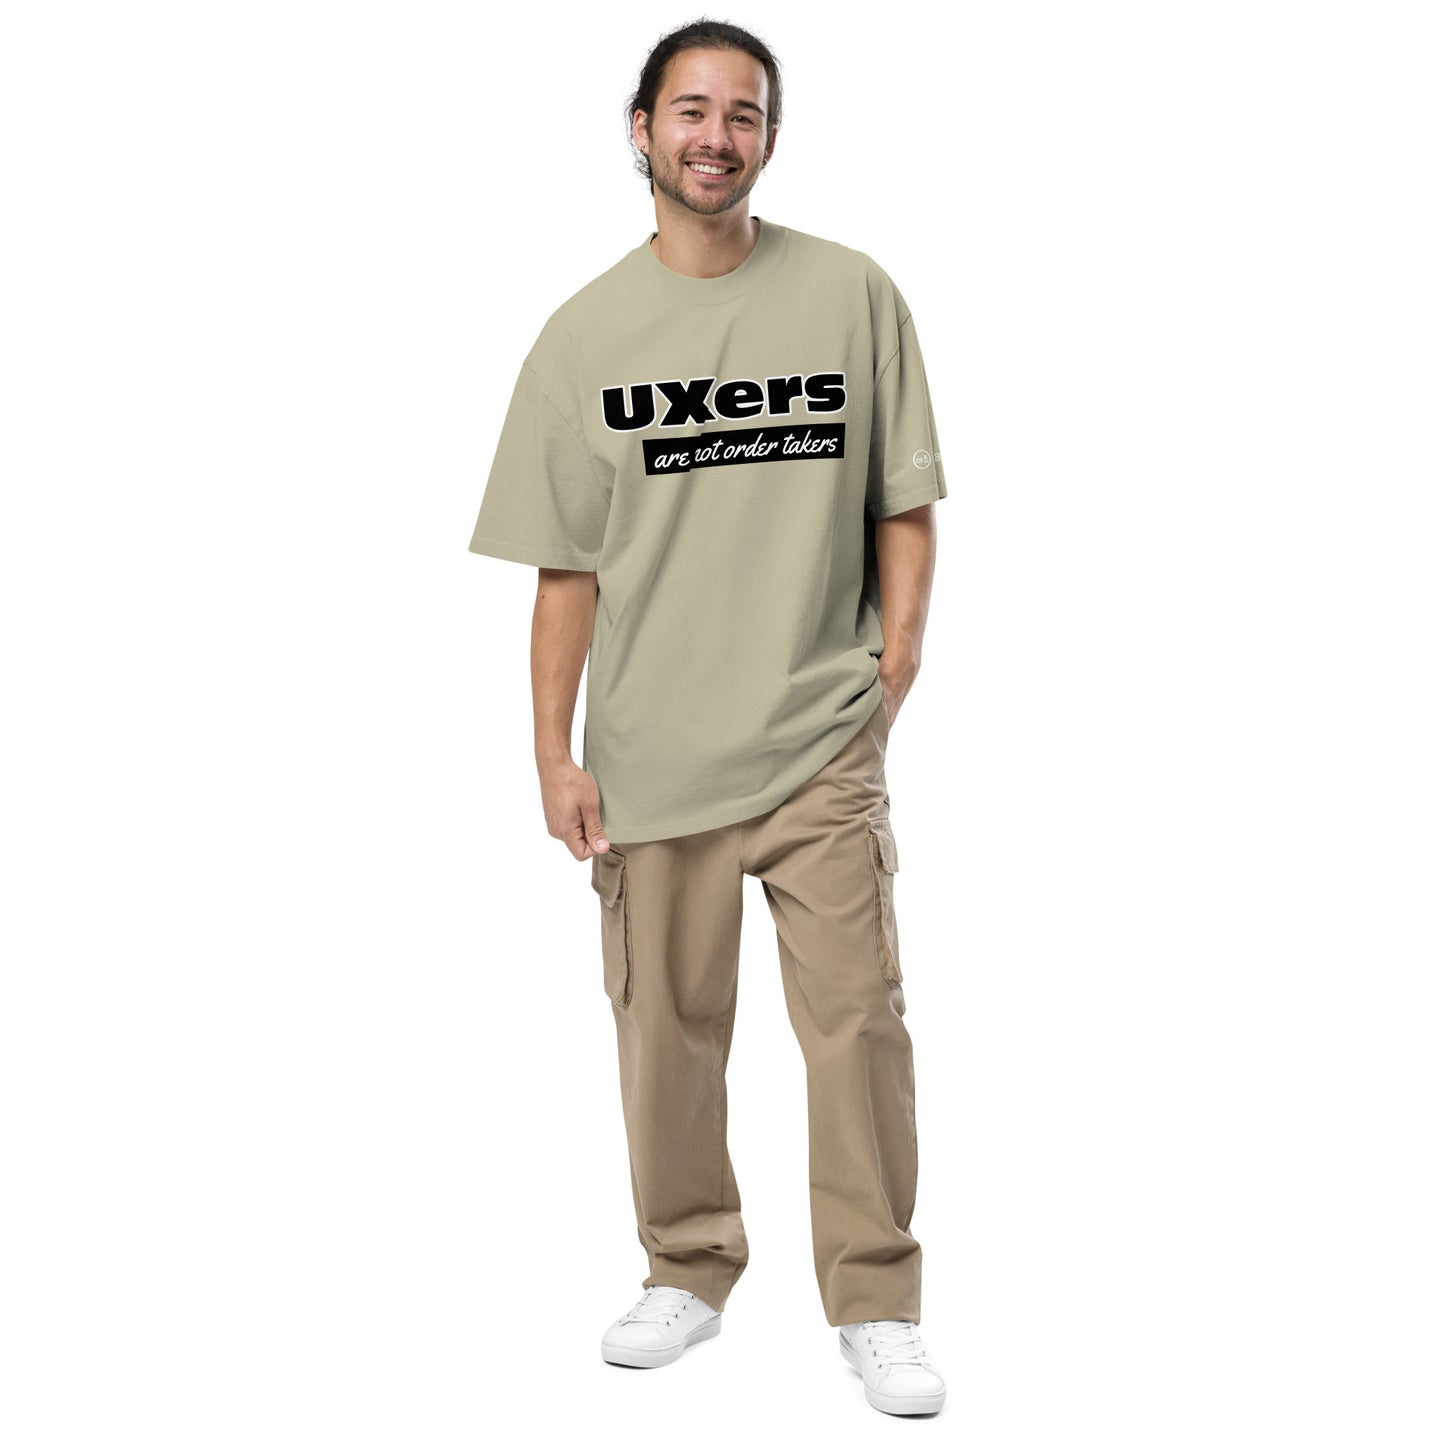 UXers are not order takers T #1 (Oversized)